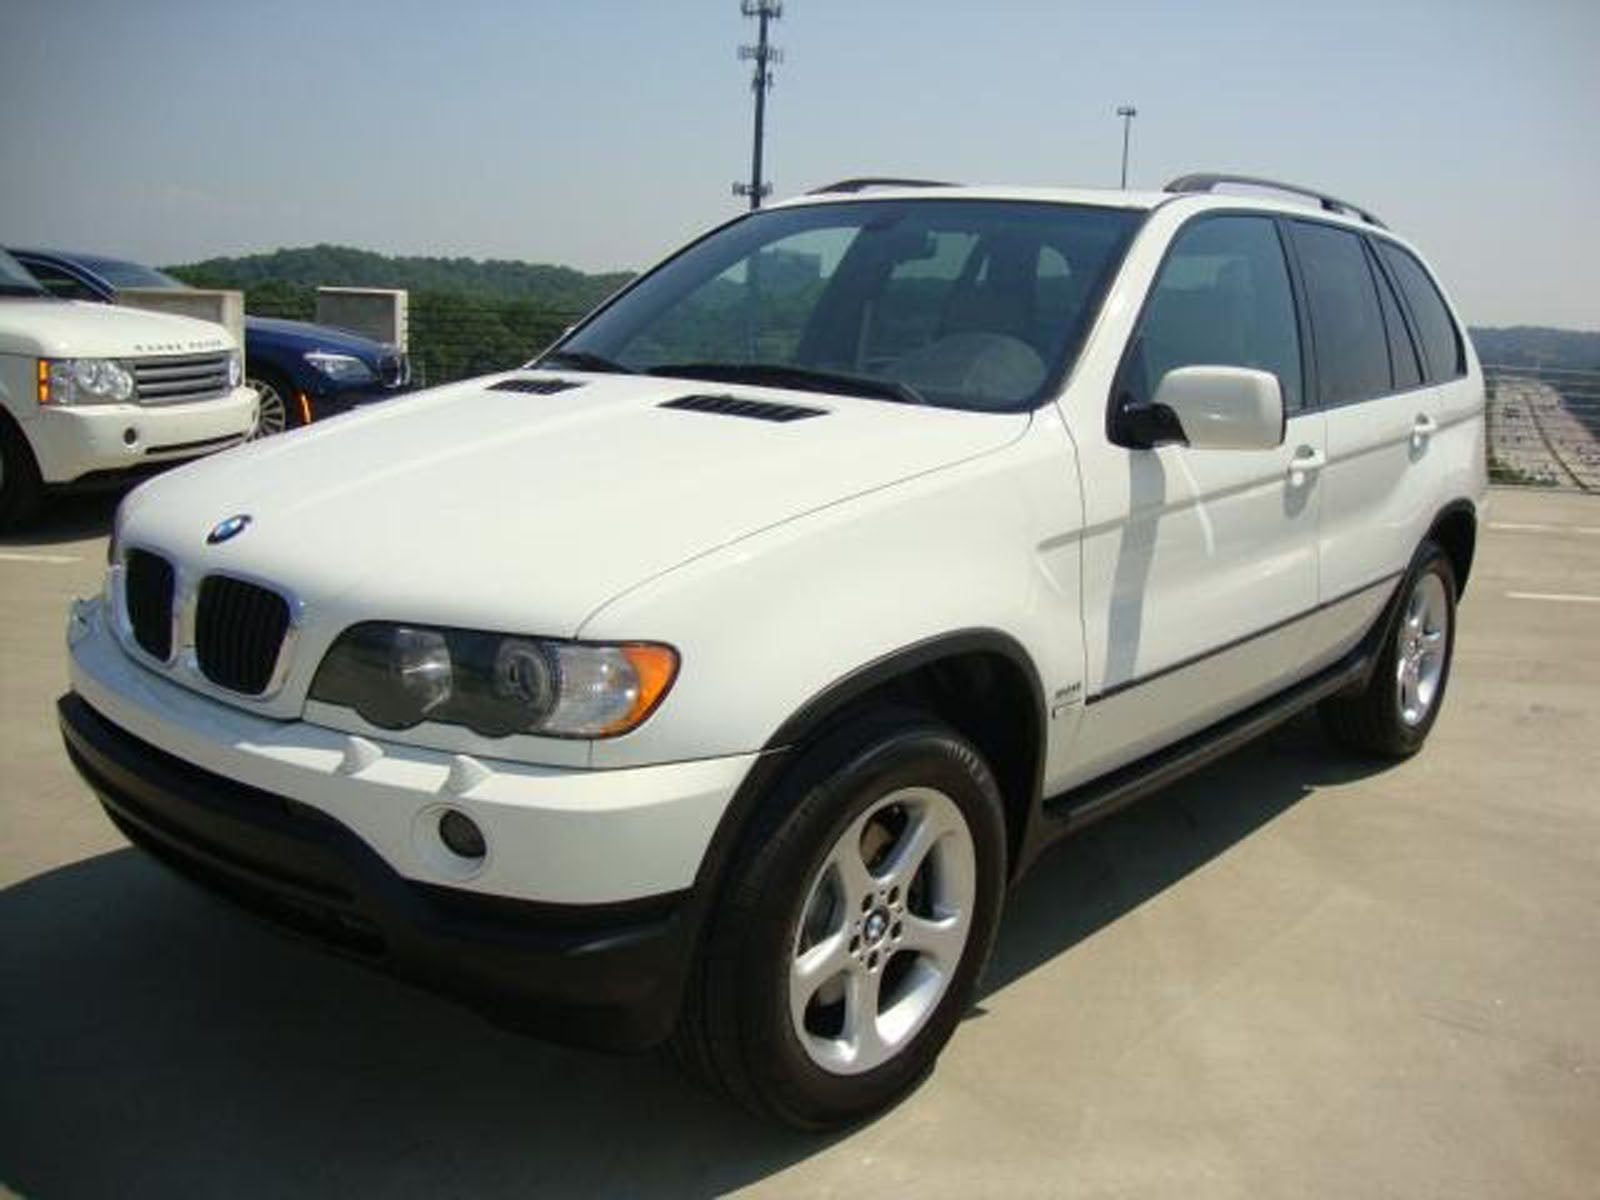 Bmw x5 for sale private #2